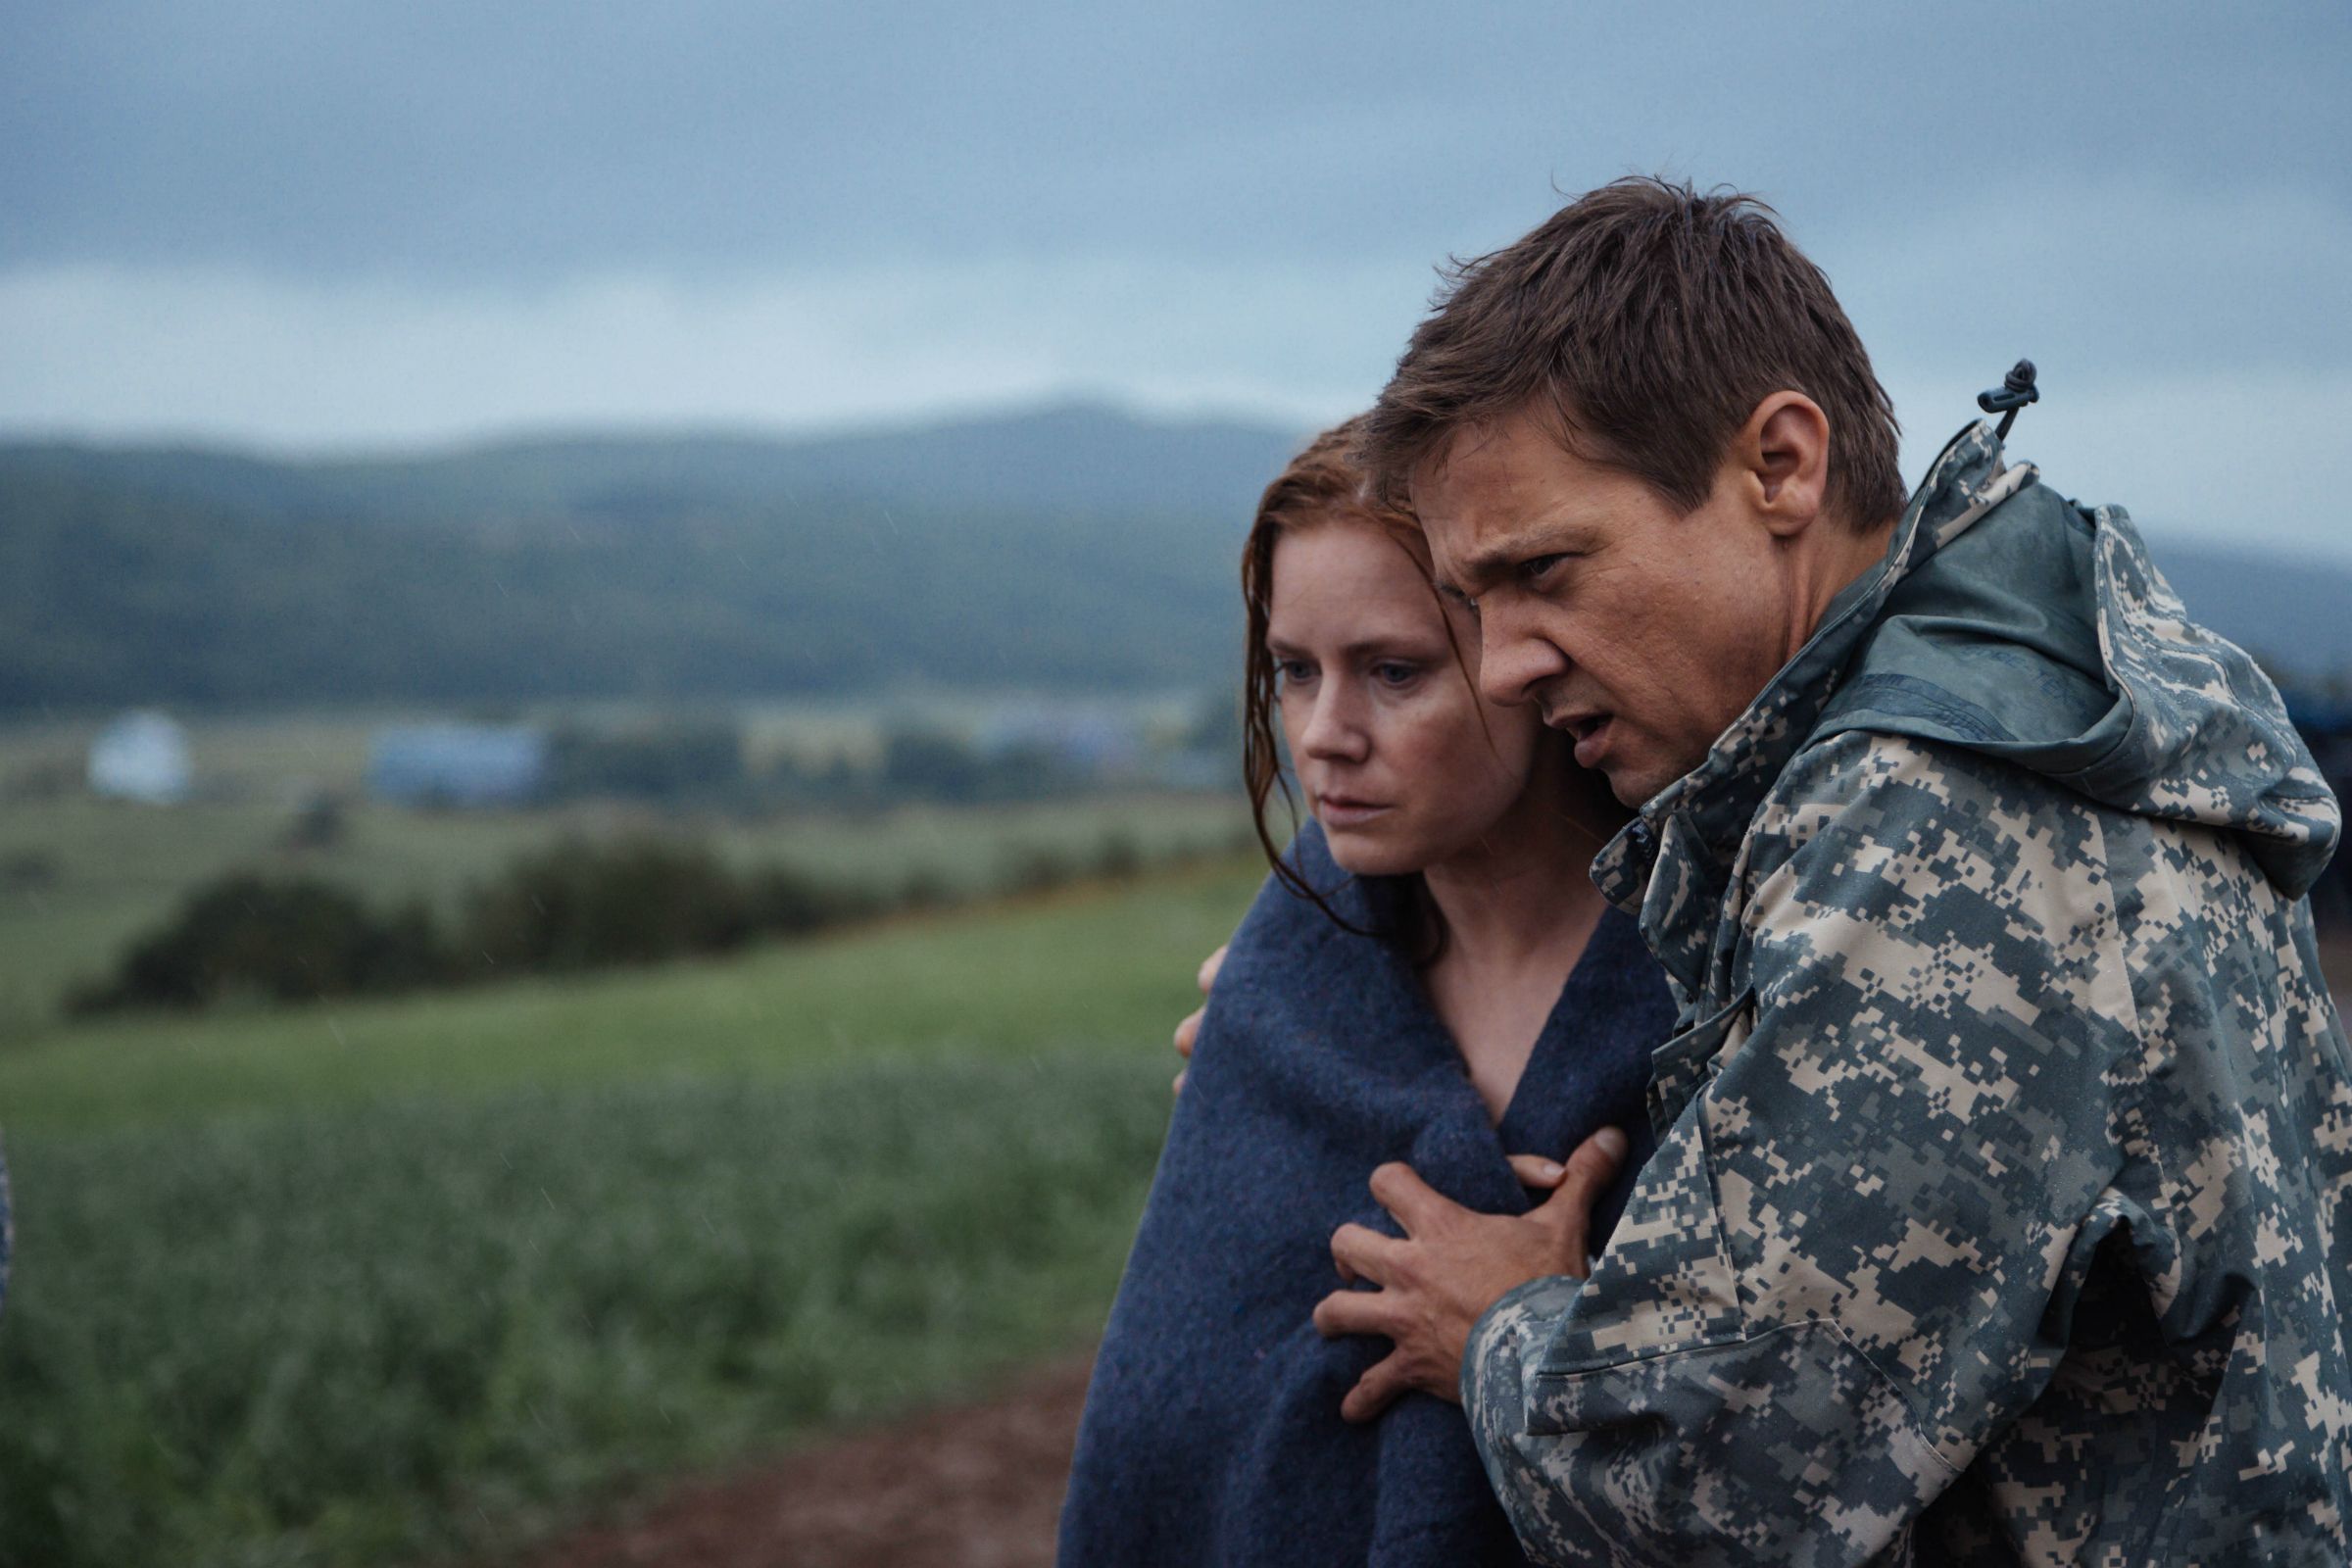 Arrival (2016) - Amy Adams and Jeremy Renner